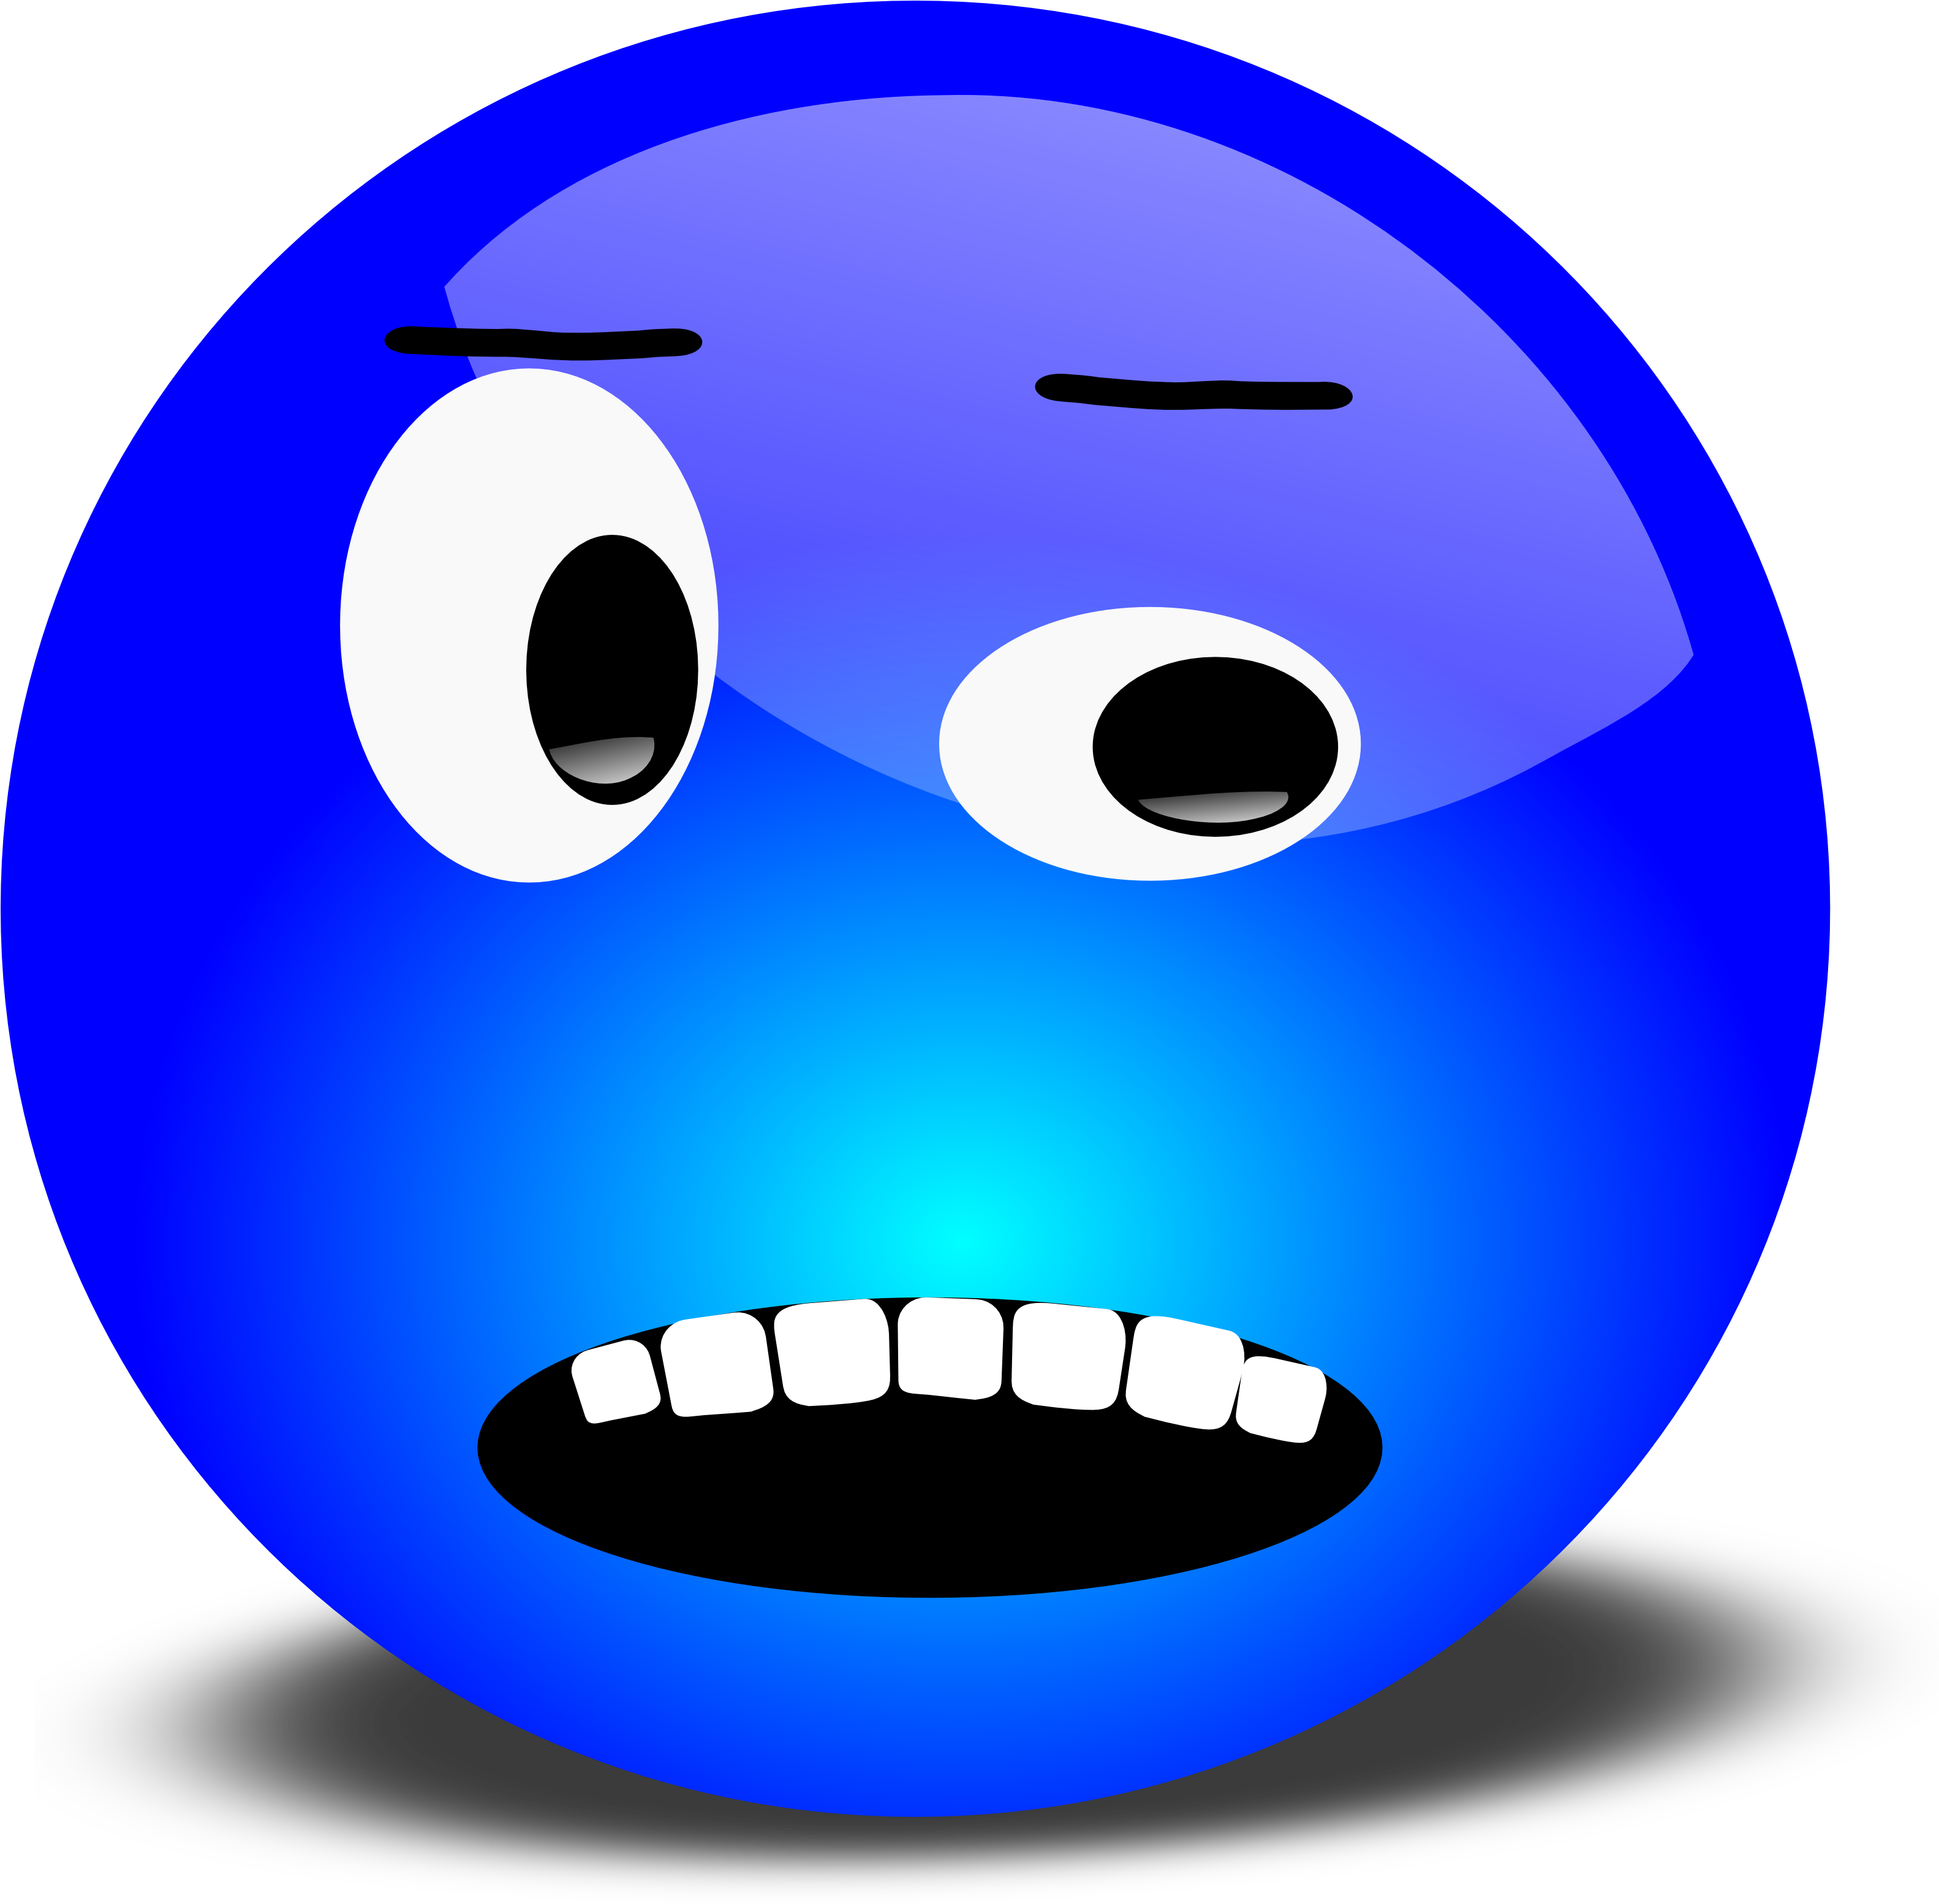 Free 3d Annoyed Smiley Face Clipart Illustration - Blue Smiley Face (3200x3134)